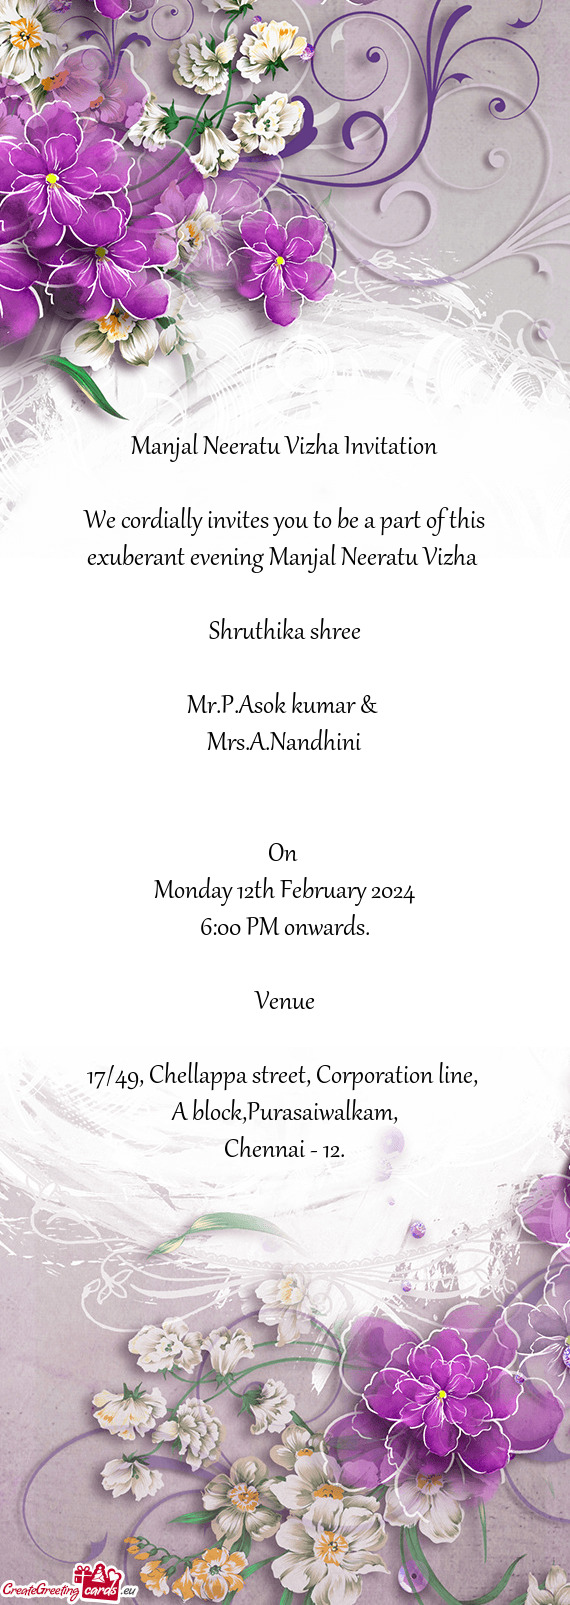 We cordially invites you to be a part of this exuberant evening Manjal Neeratu Vizha